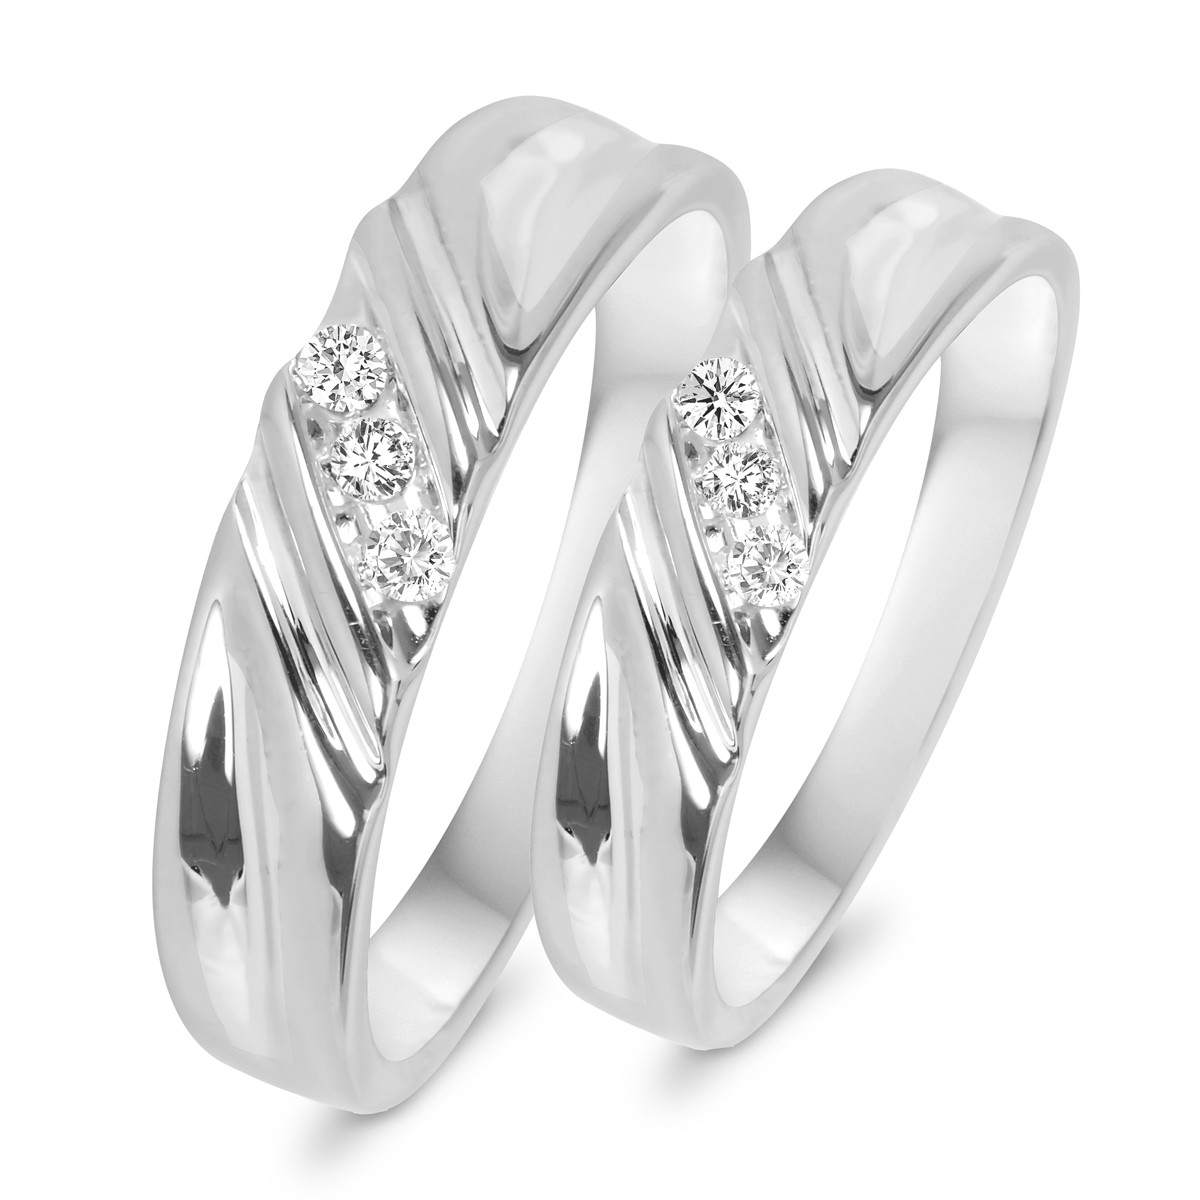 His And Hers Wedding Rings White Gold
 1 10 CT T W Diamond His And Hers Wedding Rings 10K White